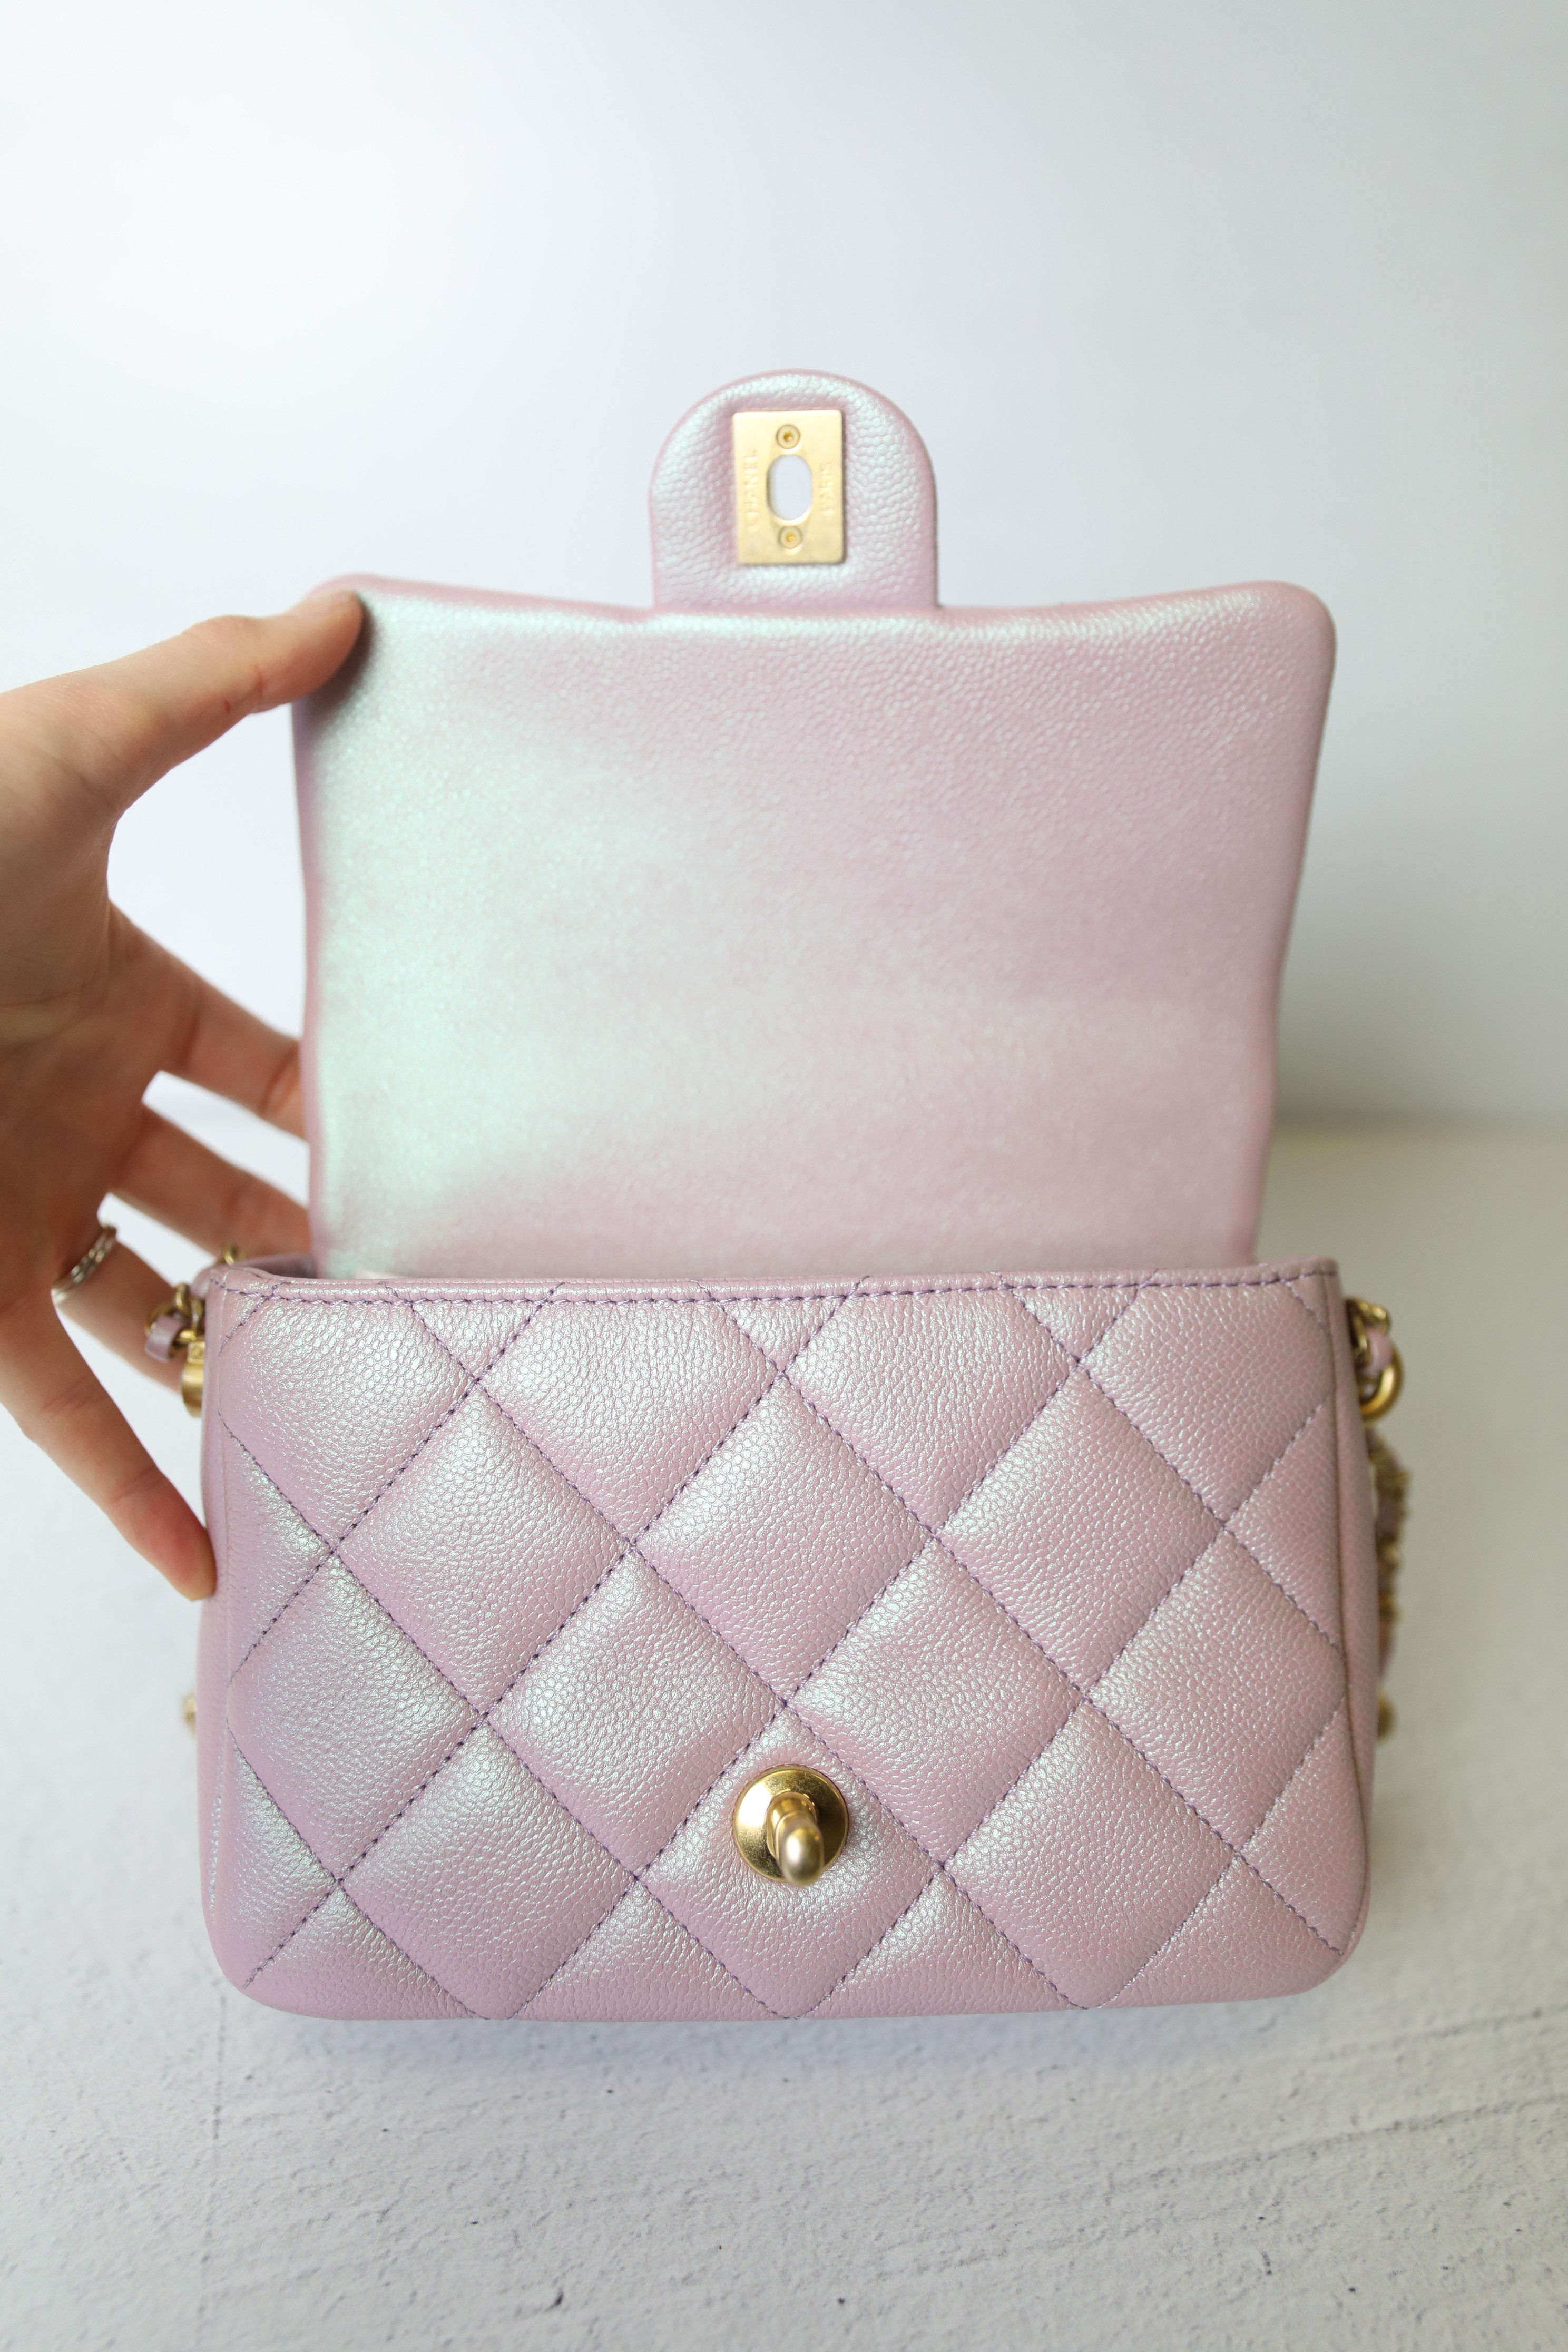 Chanel My Perfect Mini Flap, Iridescent Pink Caviar with Gold Hardware, New  in Box WA001